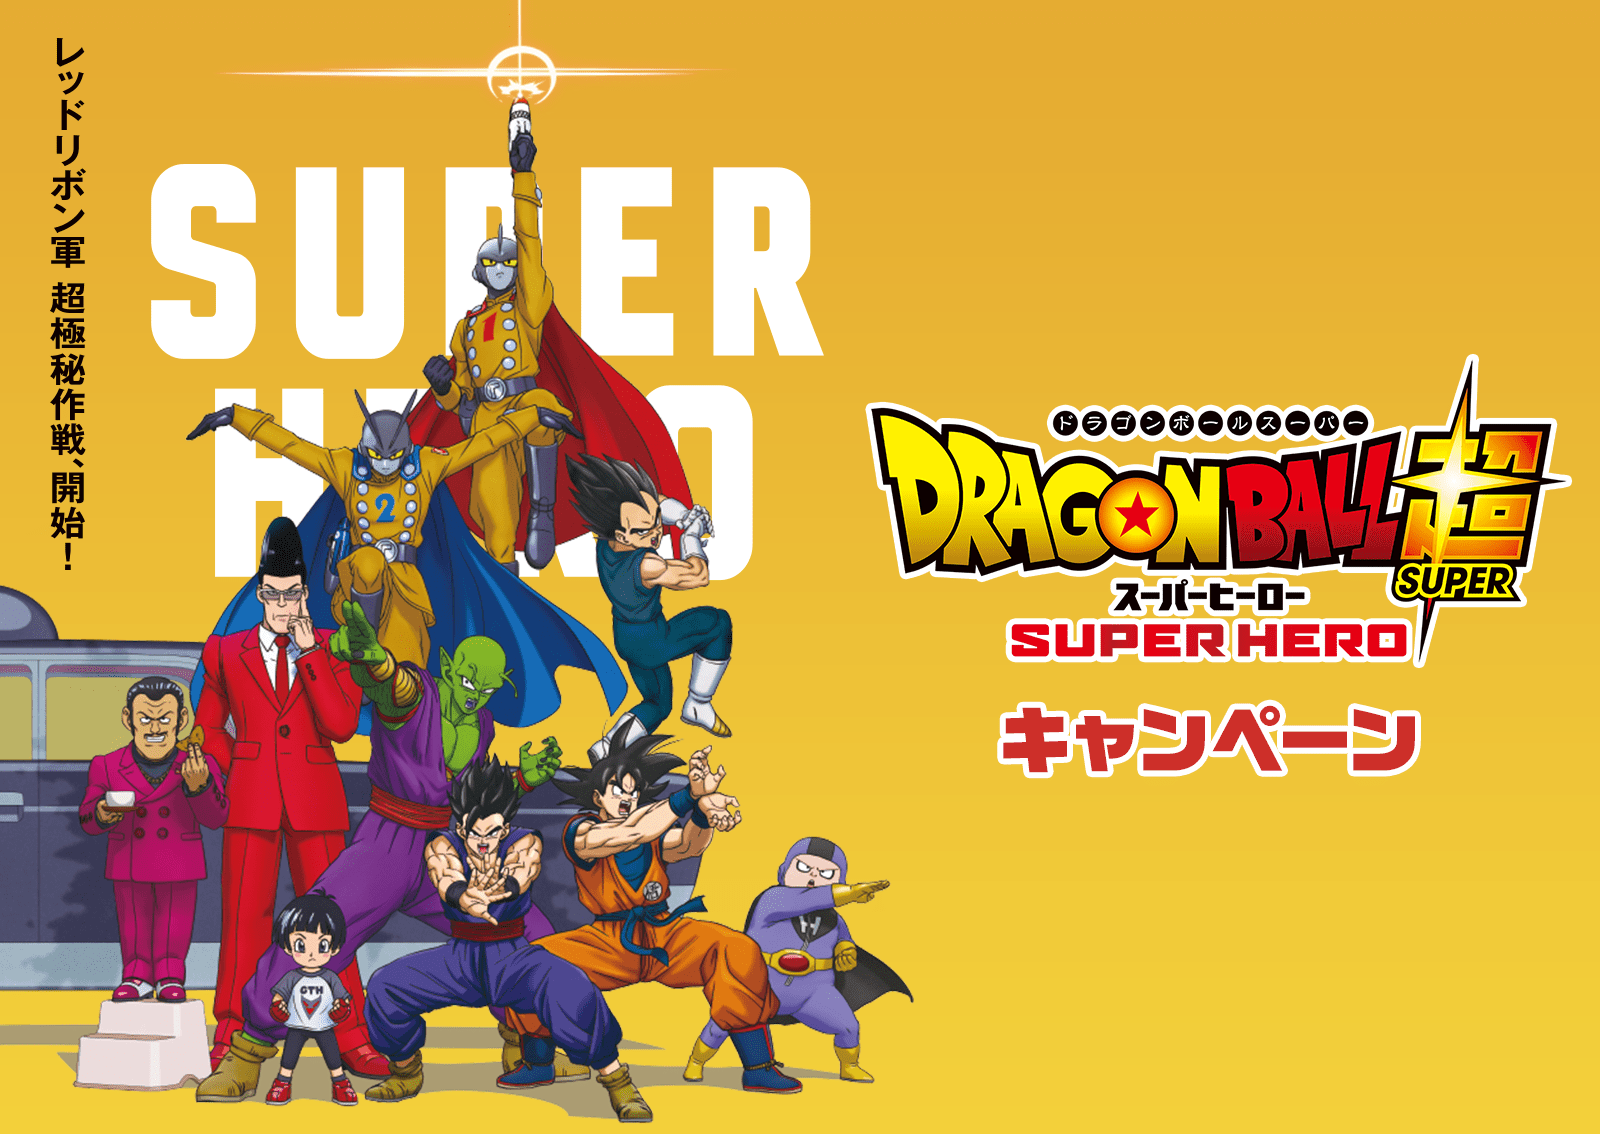 Dragon Ball Super Super Hero Snacks and Goods Offered at Lawson 1600x1134